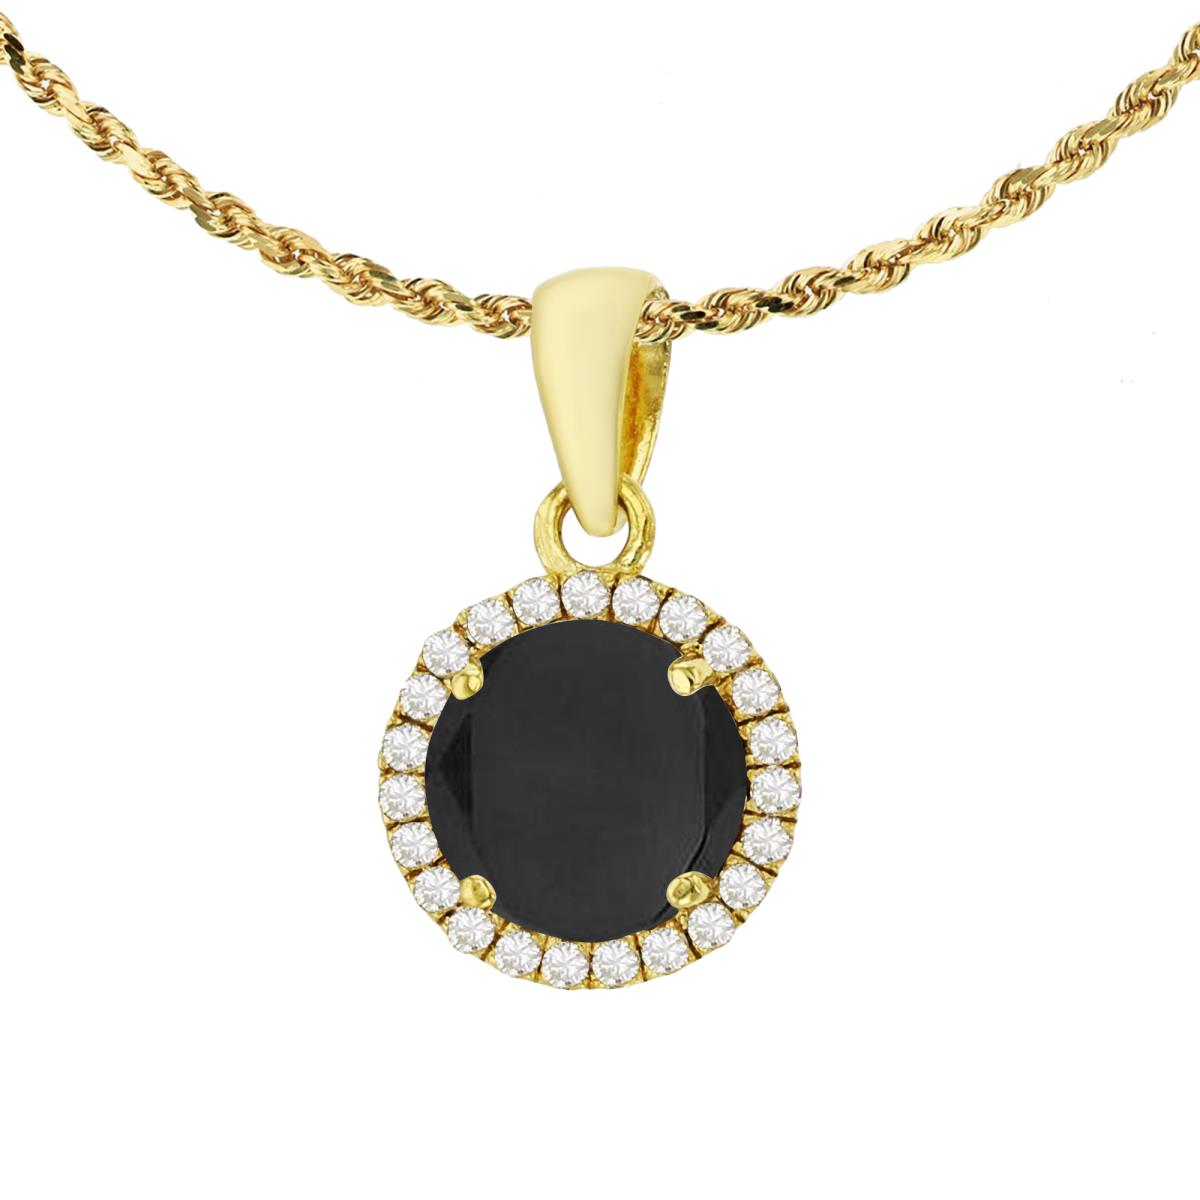 10K Yellow Gold 7mm Round Onyx & 0.12 CTTW Diamond Halo 18" Rope Chain Necklace